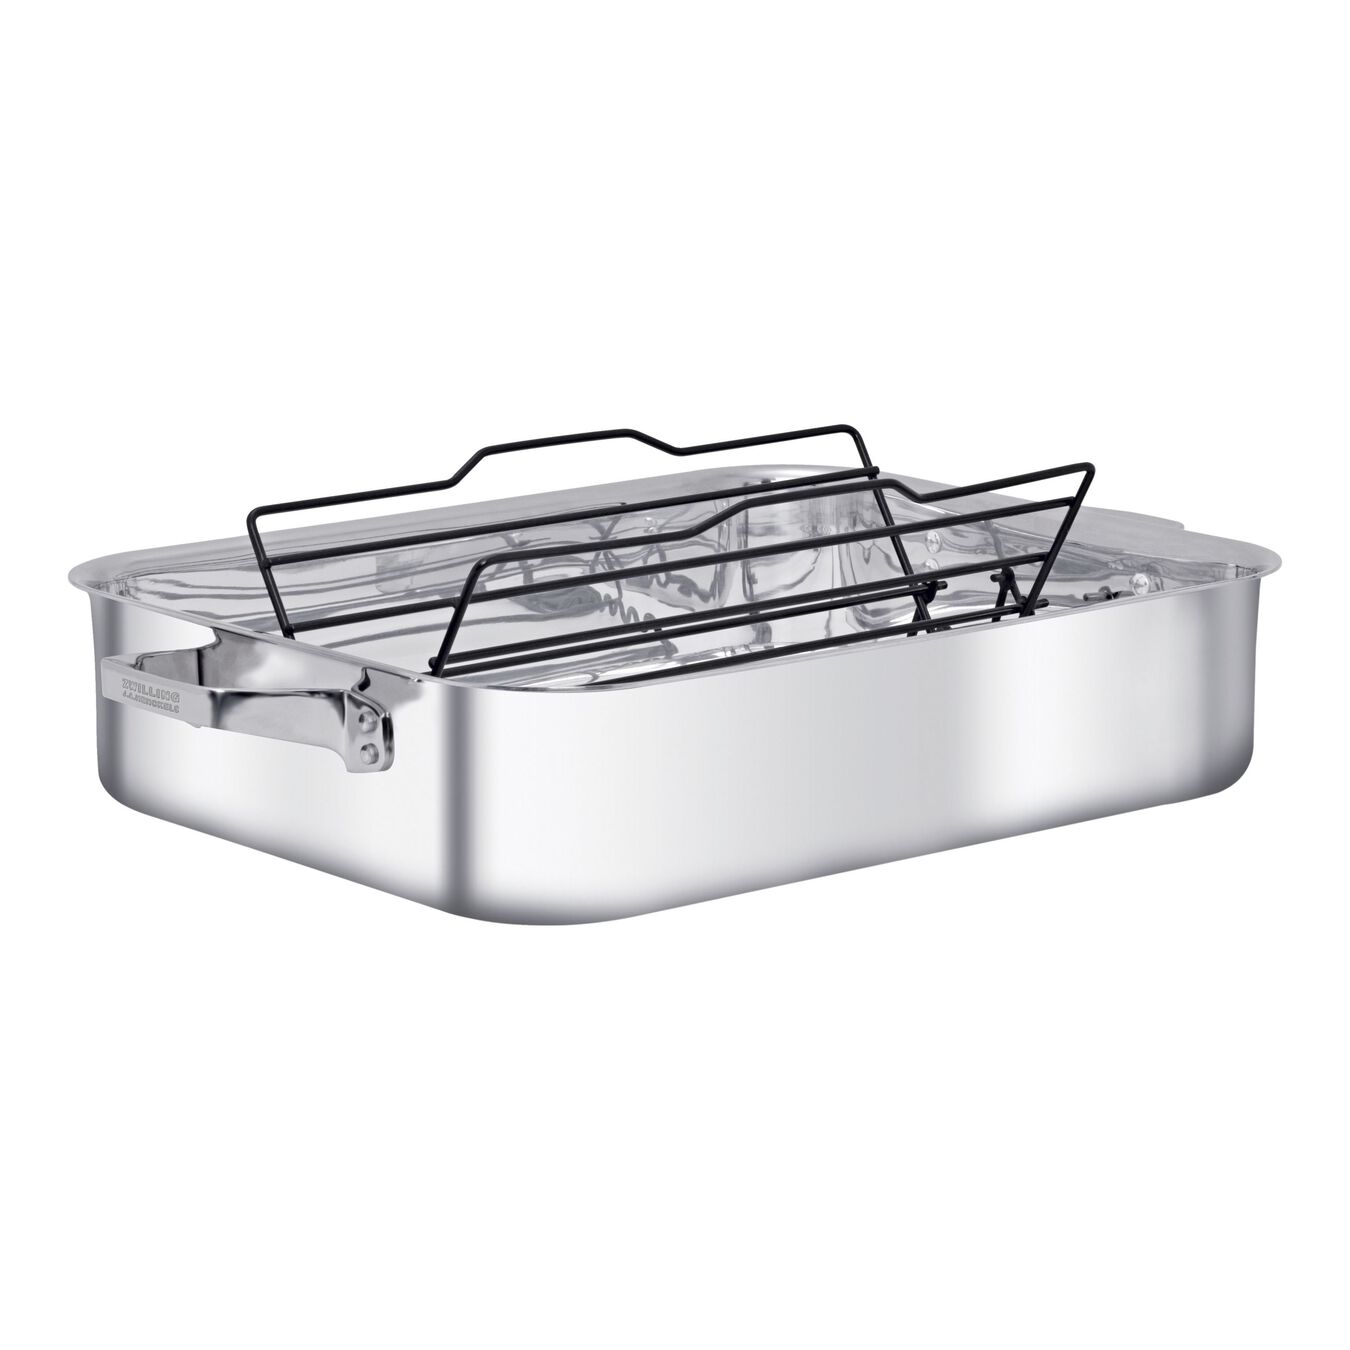  18/10 Stainless Steel rectangular Oven dish, silver,,large 1